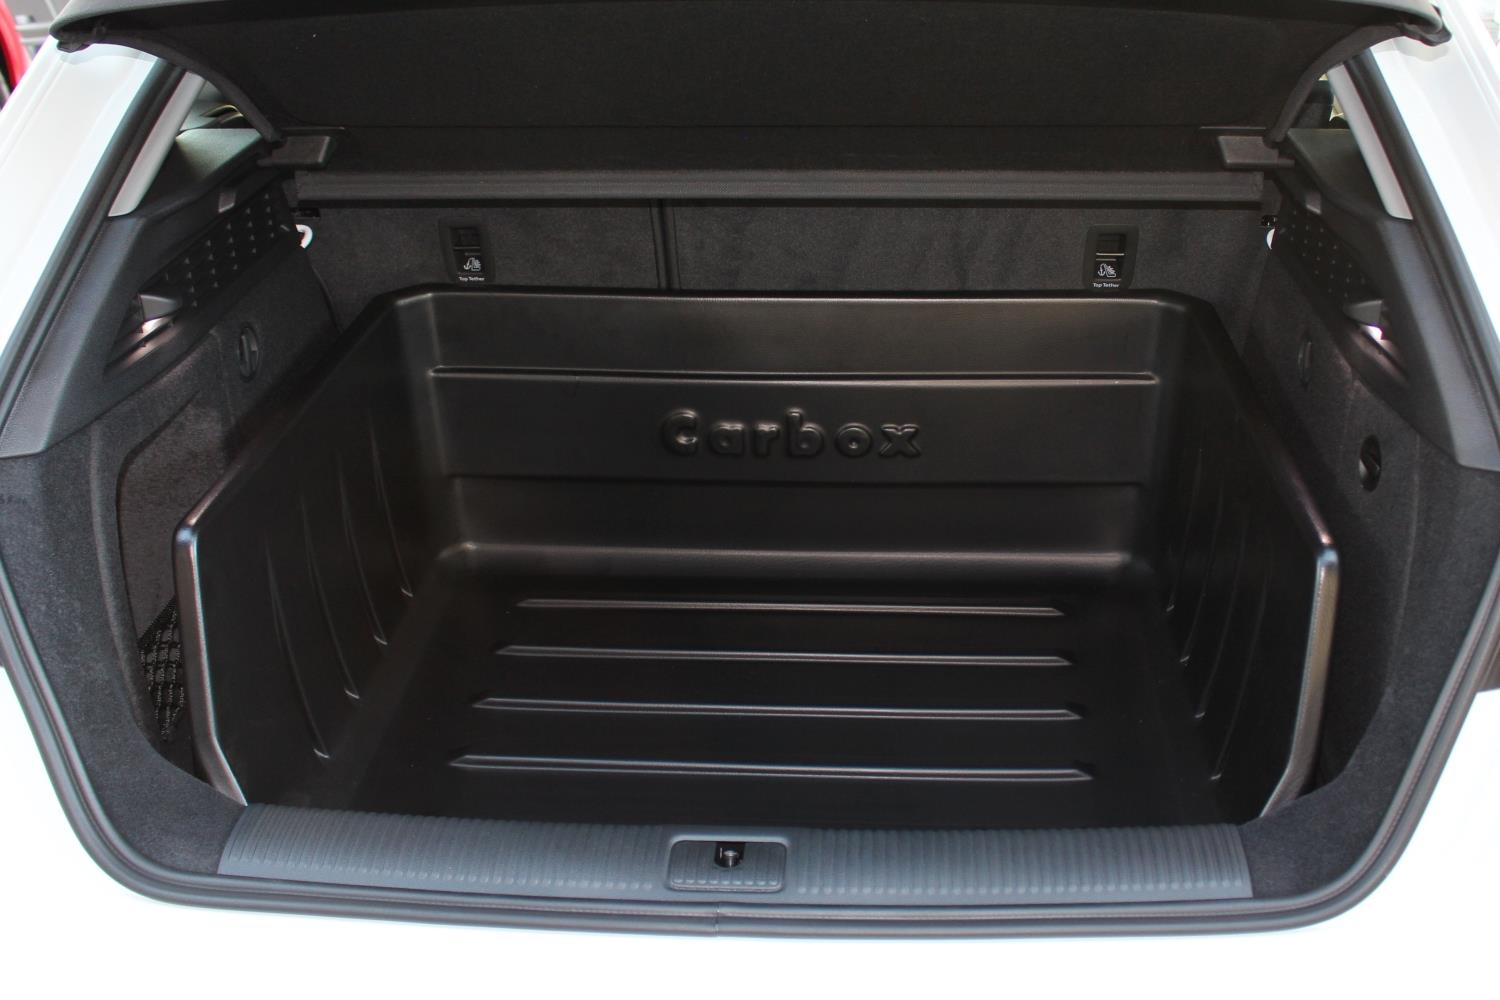 Kofferraumwanne Audi A3 Sportback 8v Carbox Yoursize Cpe